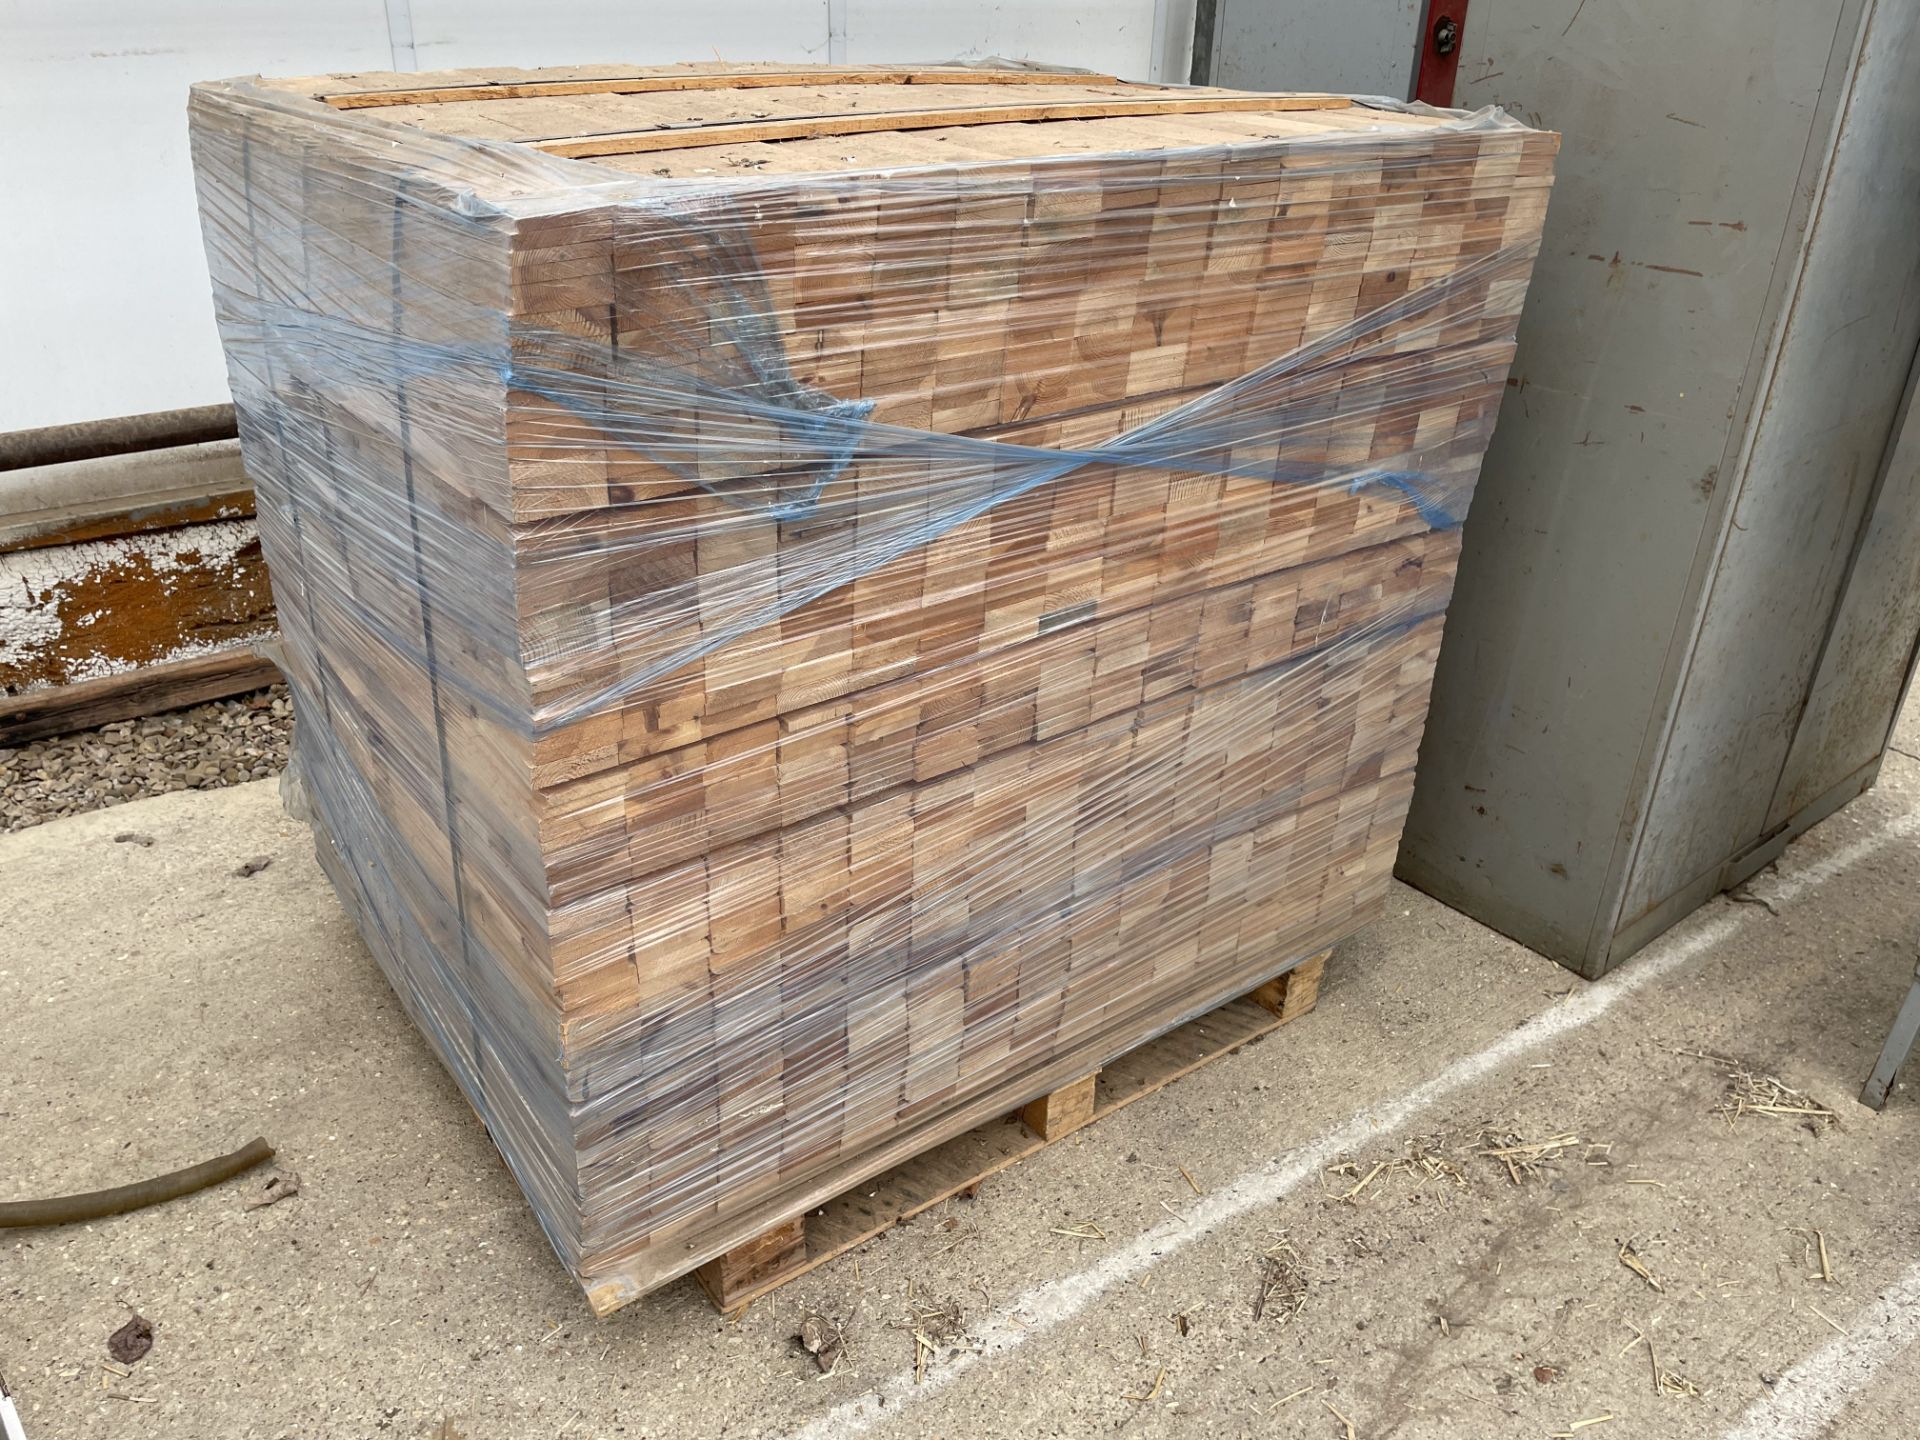 Pallet of spare new chitting box lats